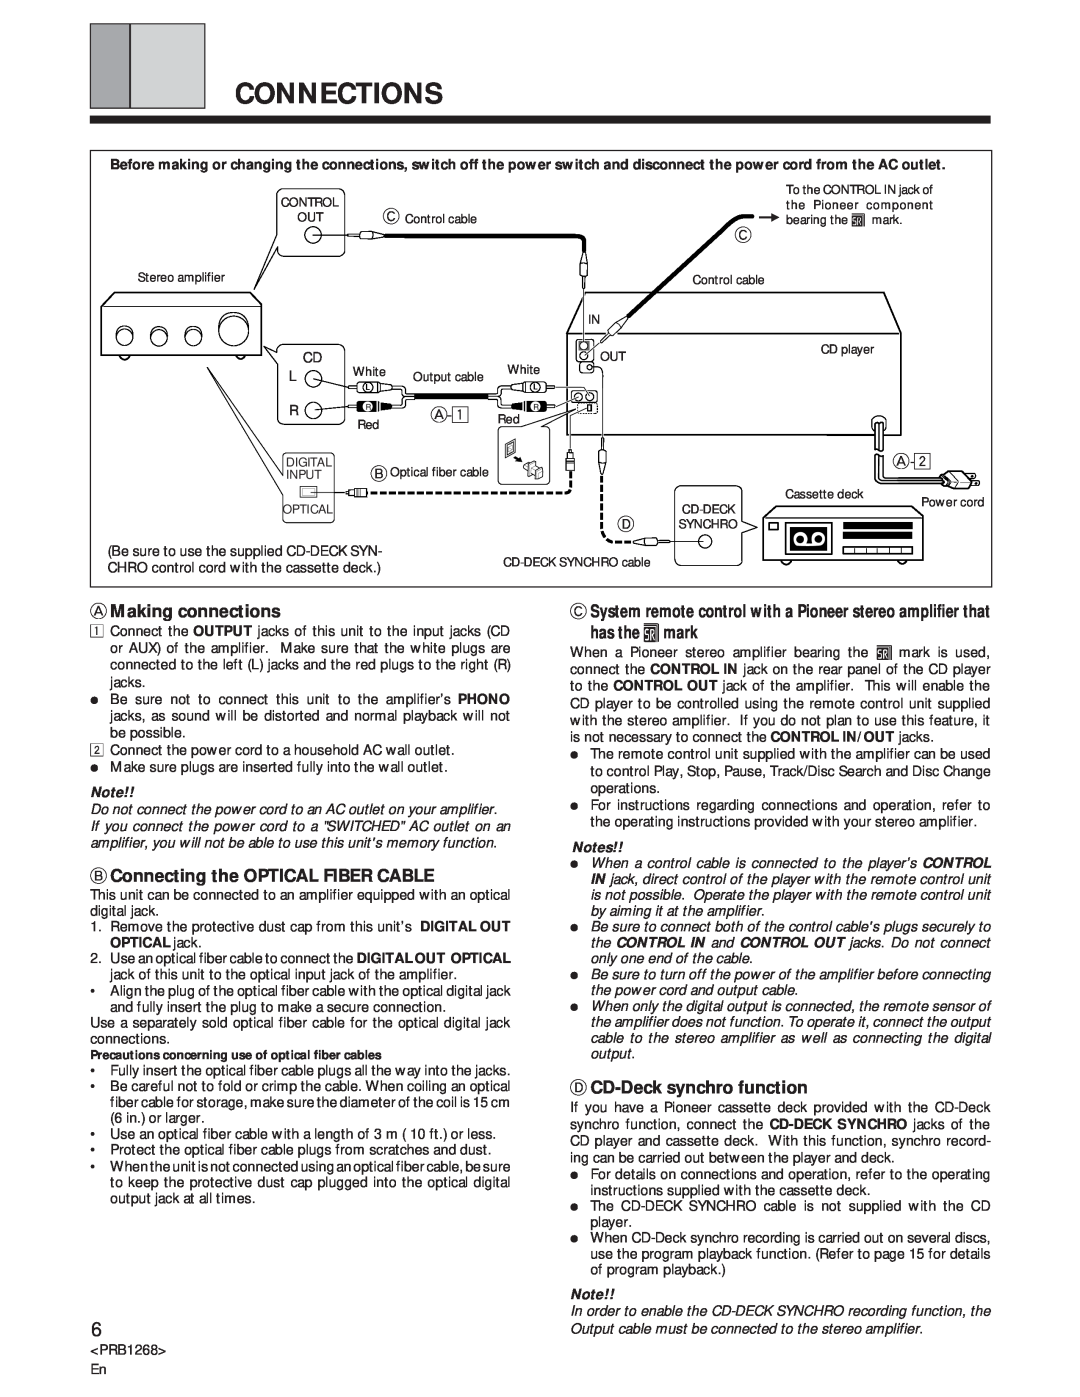 Pioneer PD-F907 specifications Connections, AMaking connections, BConnecting the OPTICAL FIBER CABLE, has the ëmark 